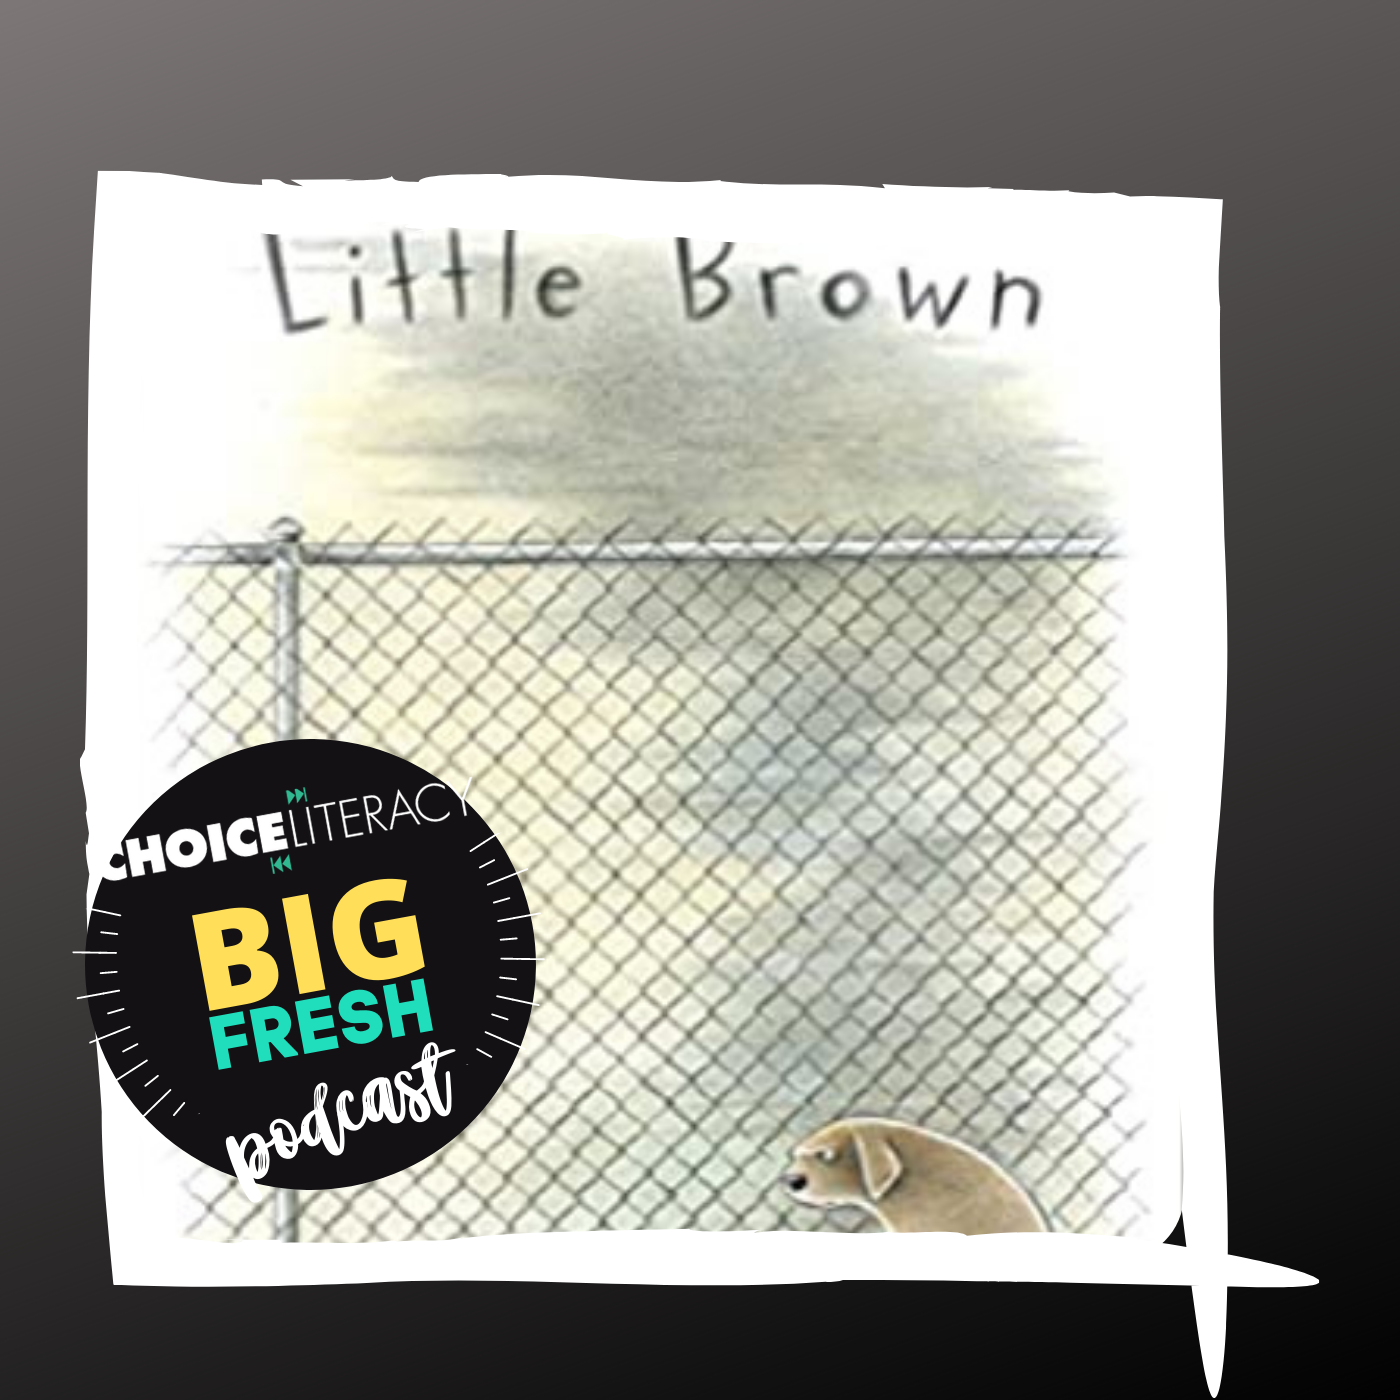 The Choice Literacy Book Club Discusses Little Brown